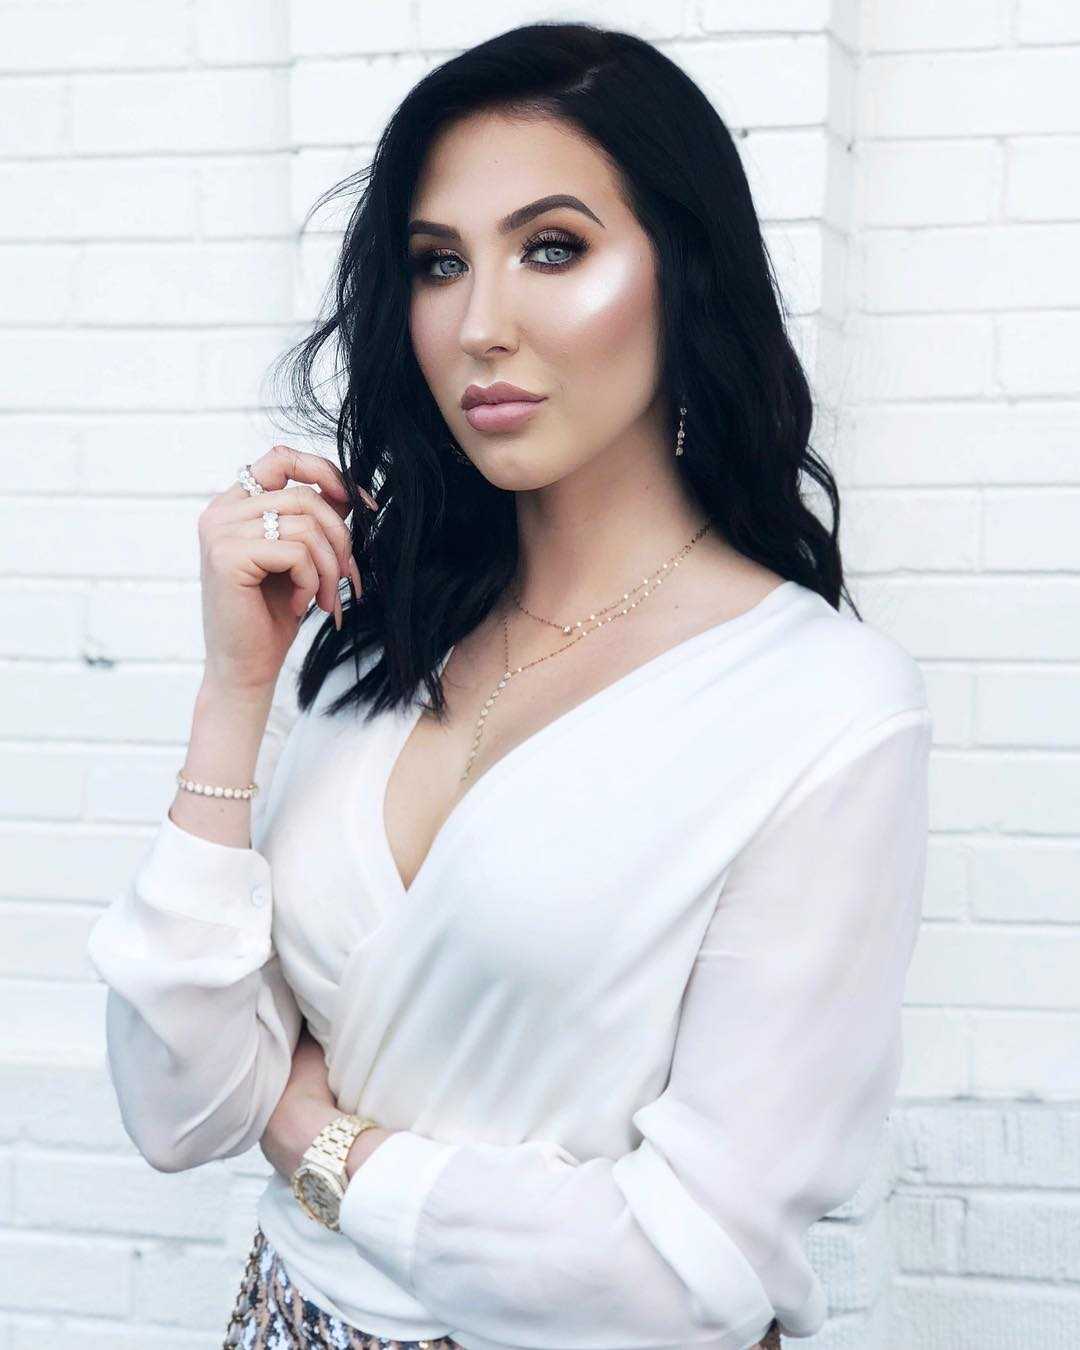 49 Nude Pictures Of Jaclyn Hill Will Leave You Panting For Her | Best Of Comic Books